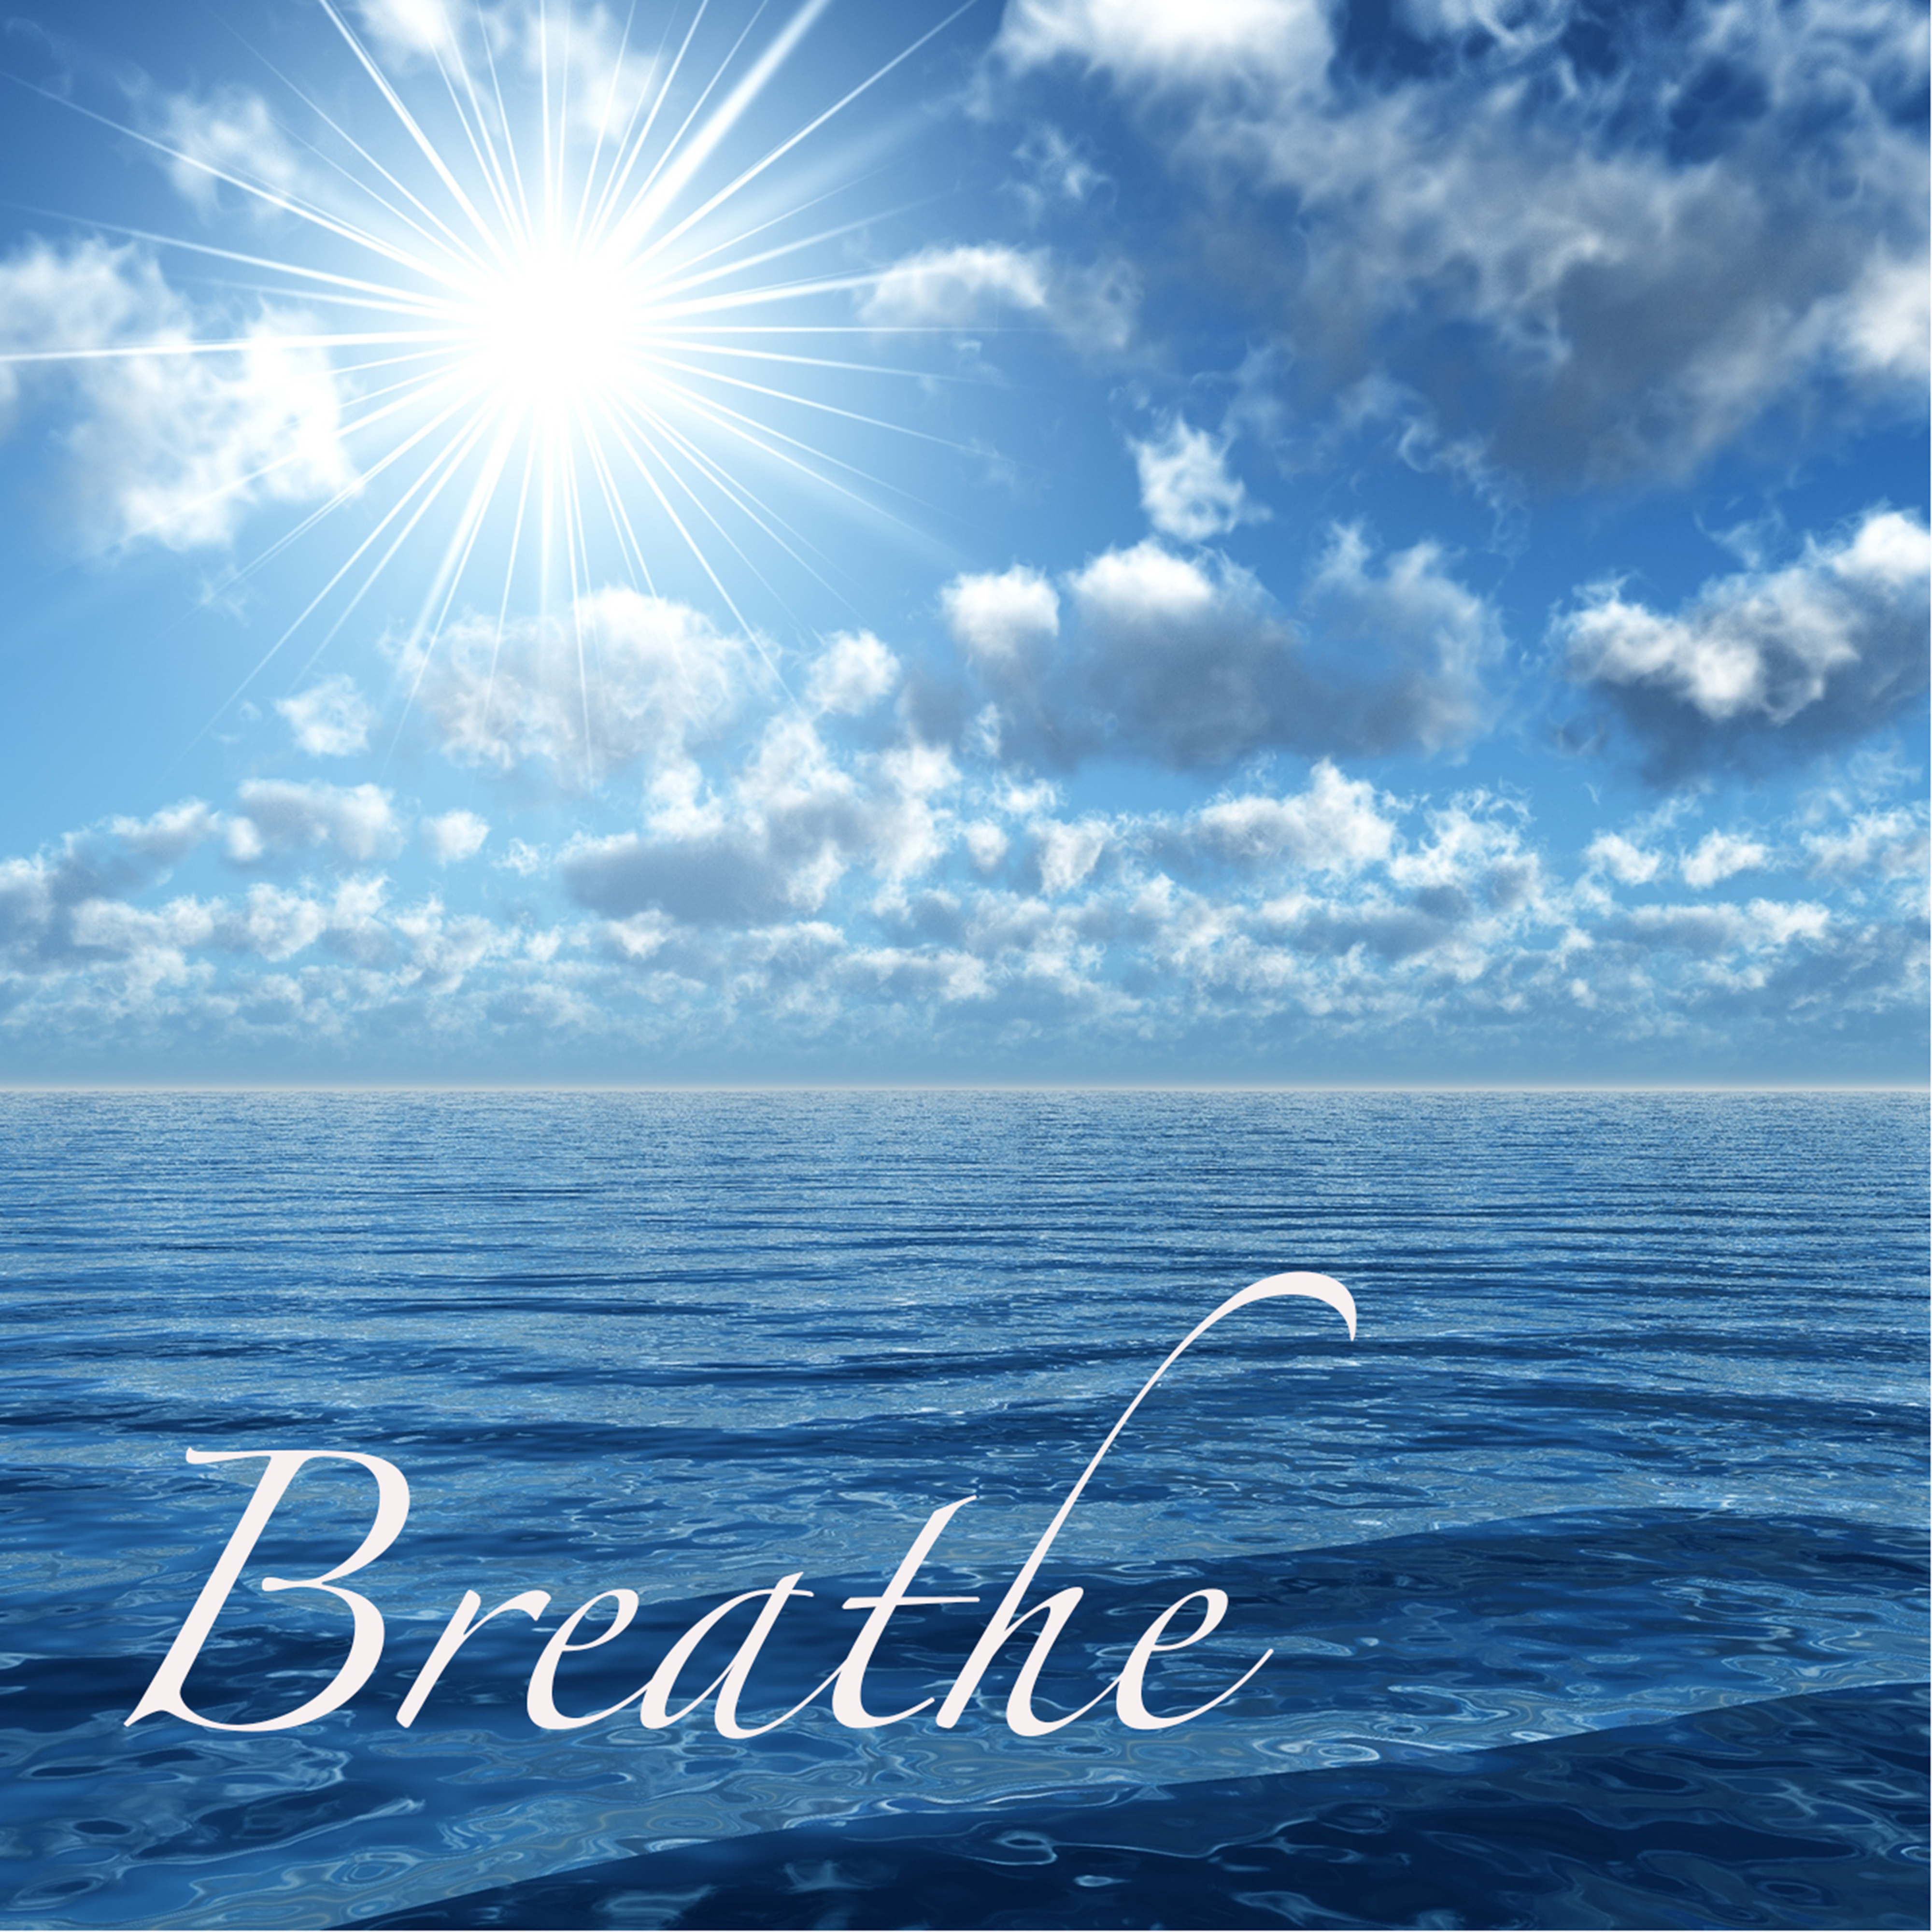 Breathe - Relaxing Meditation Piano Music for Mindfullness Meditation Relaxation, Massage, Reiki and Yoga